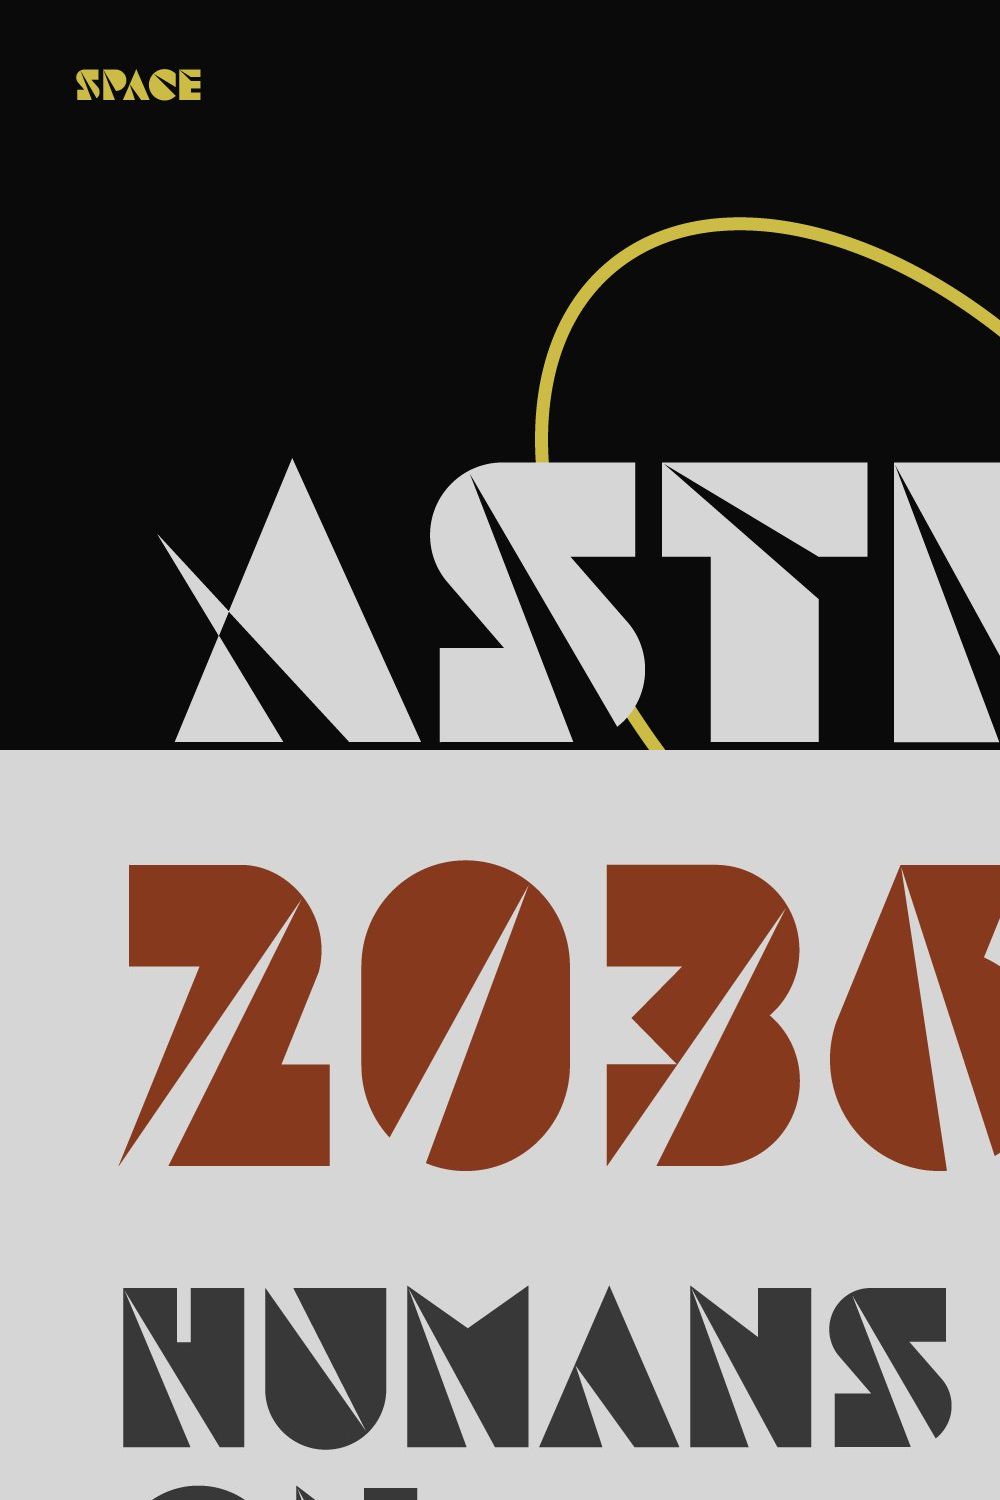 Astroz pinterest preview image.